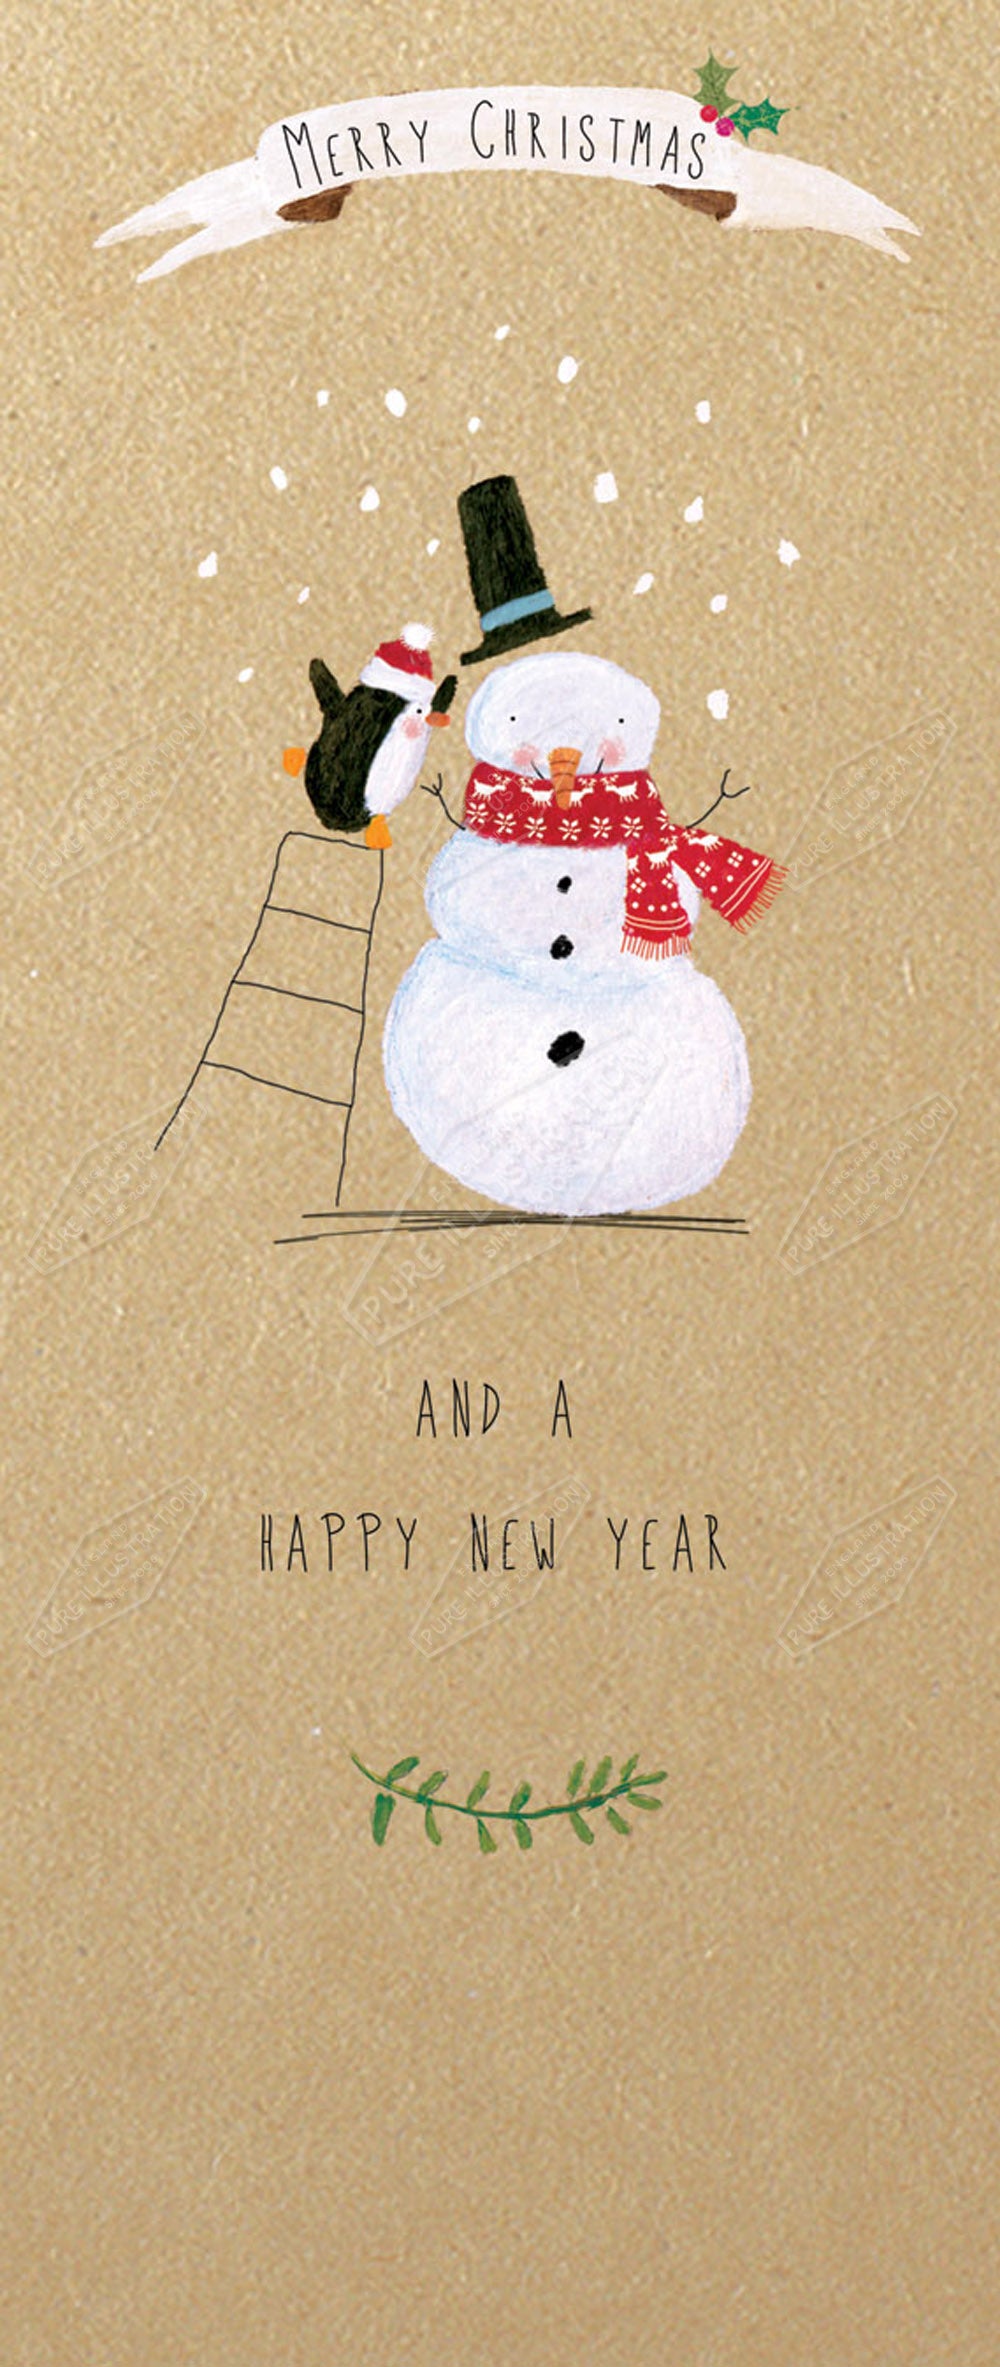 00029593CRE - Pengiun Decorating Snowman Illustration by Cory Reid - Pure Art Licensing Agency